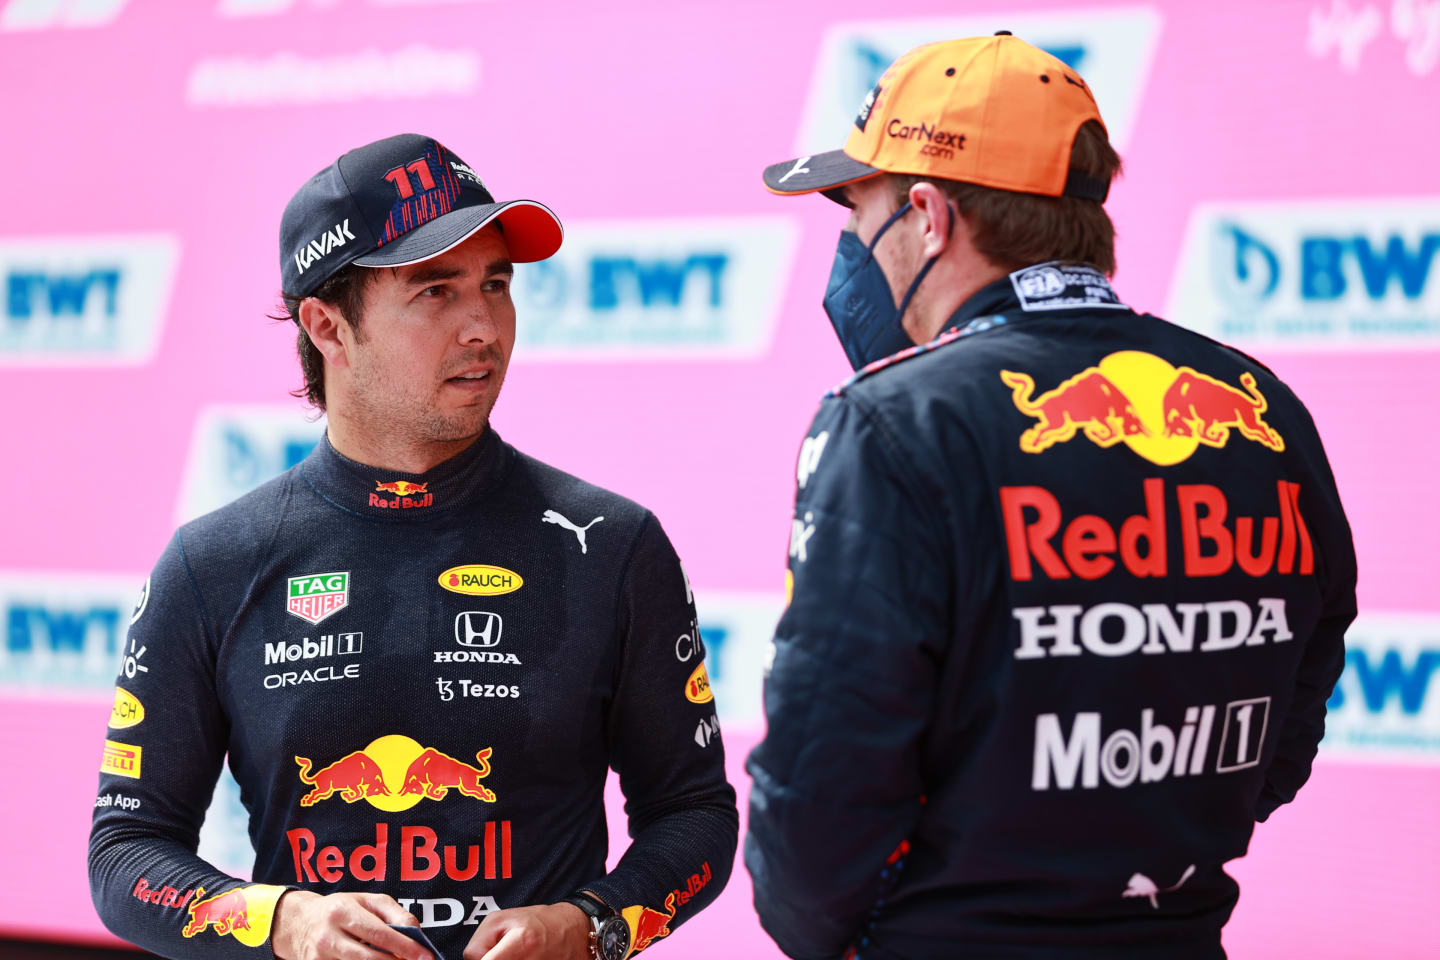 SPIELBERG, AUSTRIA - JULY 03: Pole position qualifier Max Verstappen of Netherlands and Red Bull Racing and third place qualifier Sergio Perez of Mexico and Red Bull Racing celebrate in parc ferme during qualifying ahead of the F1 Grand Prix of Austria at Red Bull Ring on July 03, 2021 in Spielberg, Austria. (Photo by Mark Thompson/Getty Images)